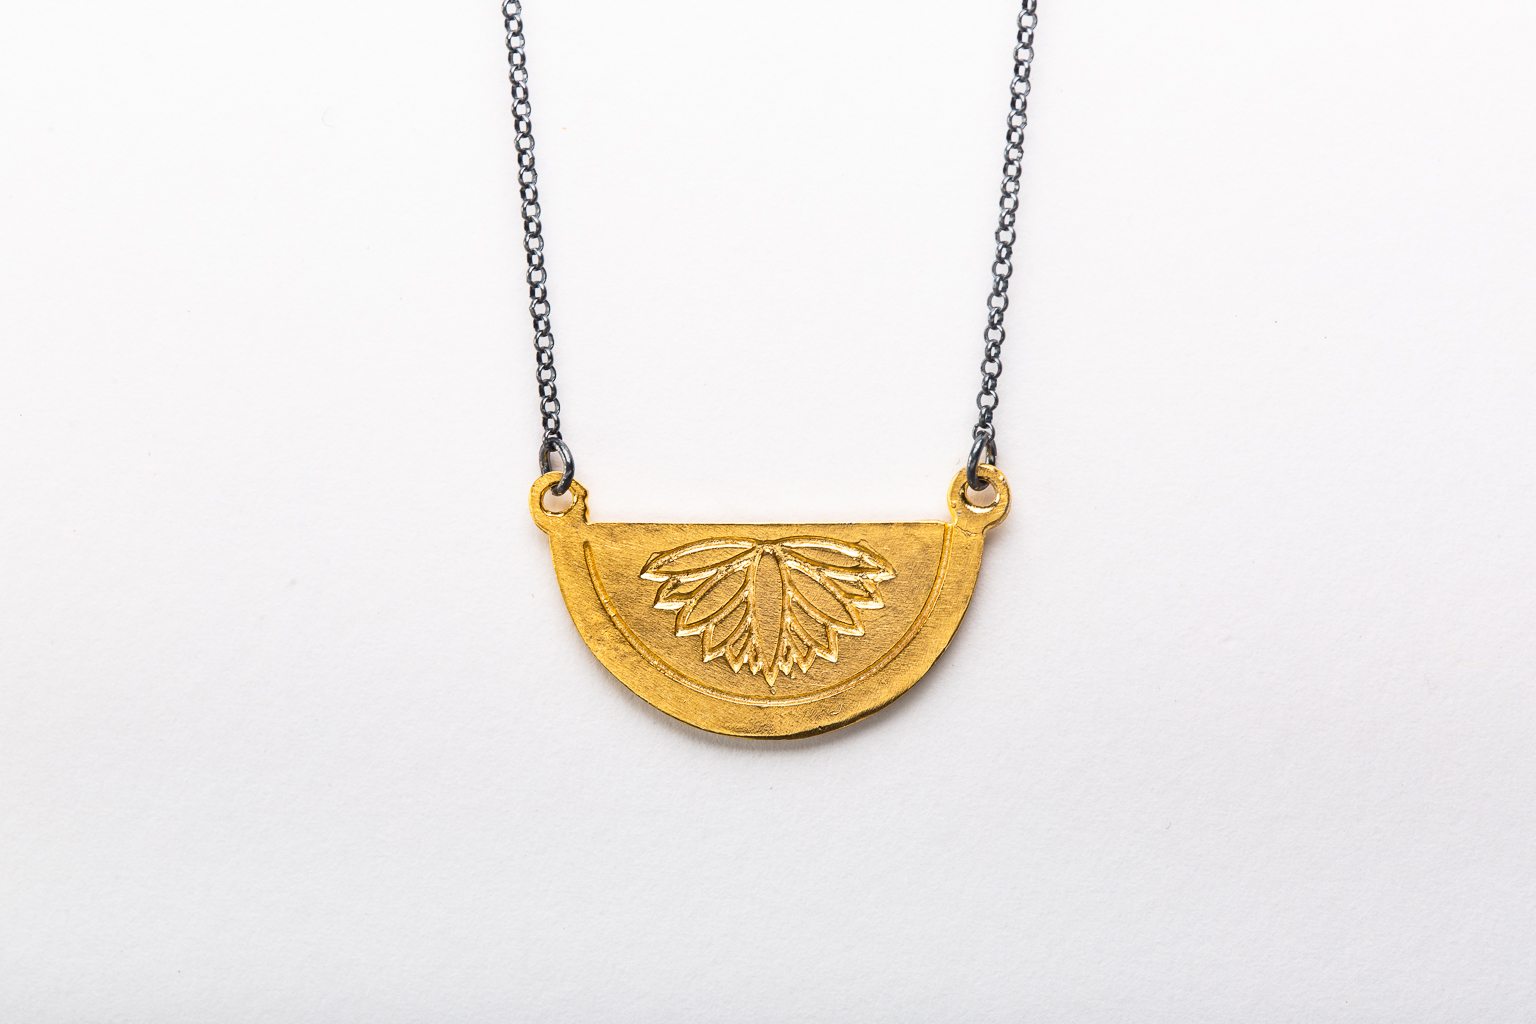 Gold-plated "Lotus" necklace